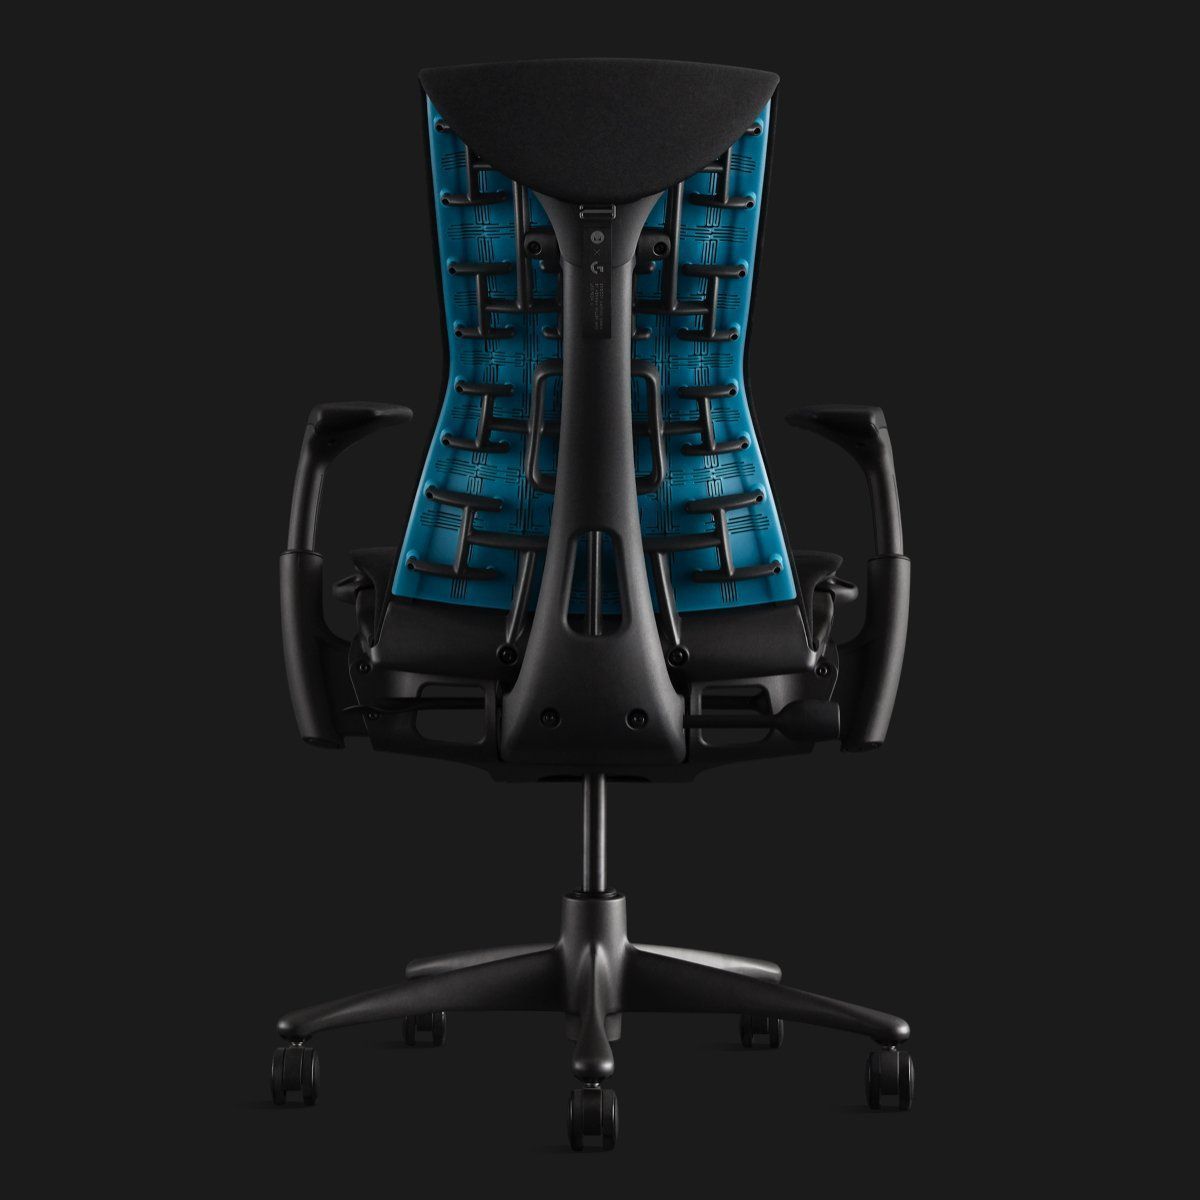 Embody Gaming Chair : vos fesses méritent ce fauteuil gaming à 1500 dollars #6